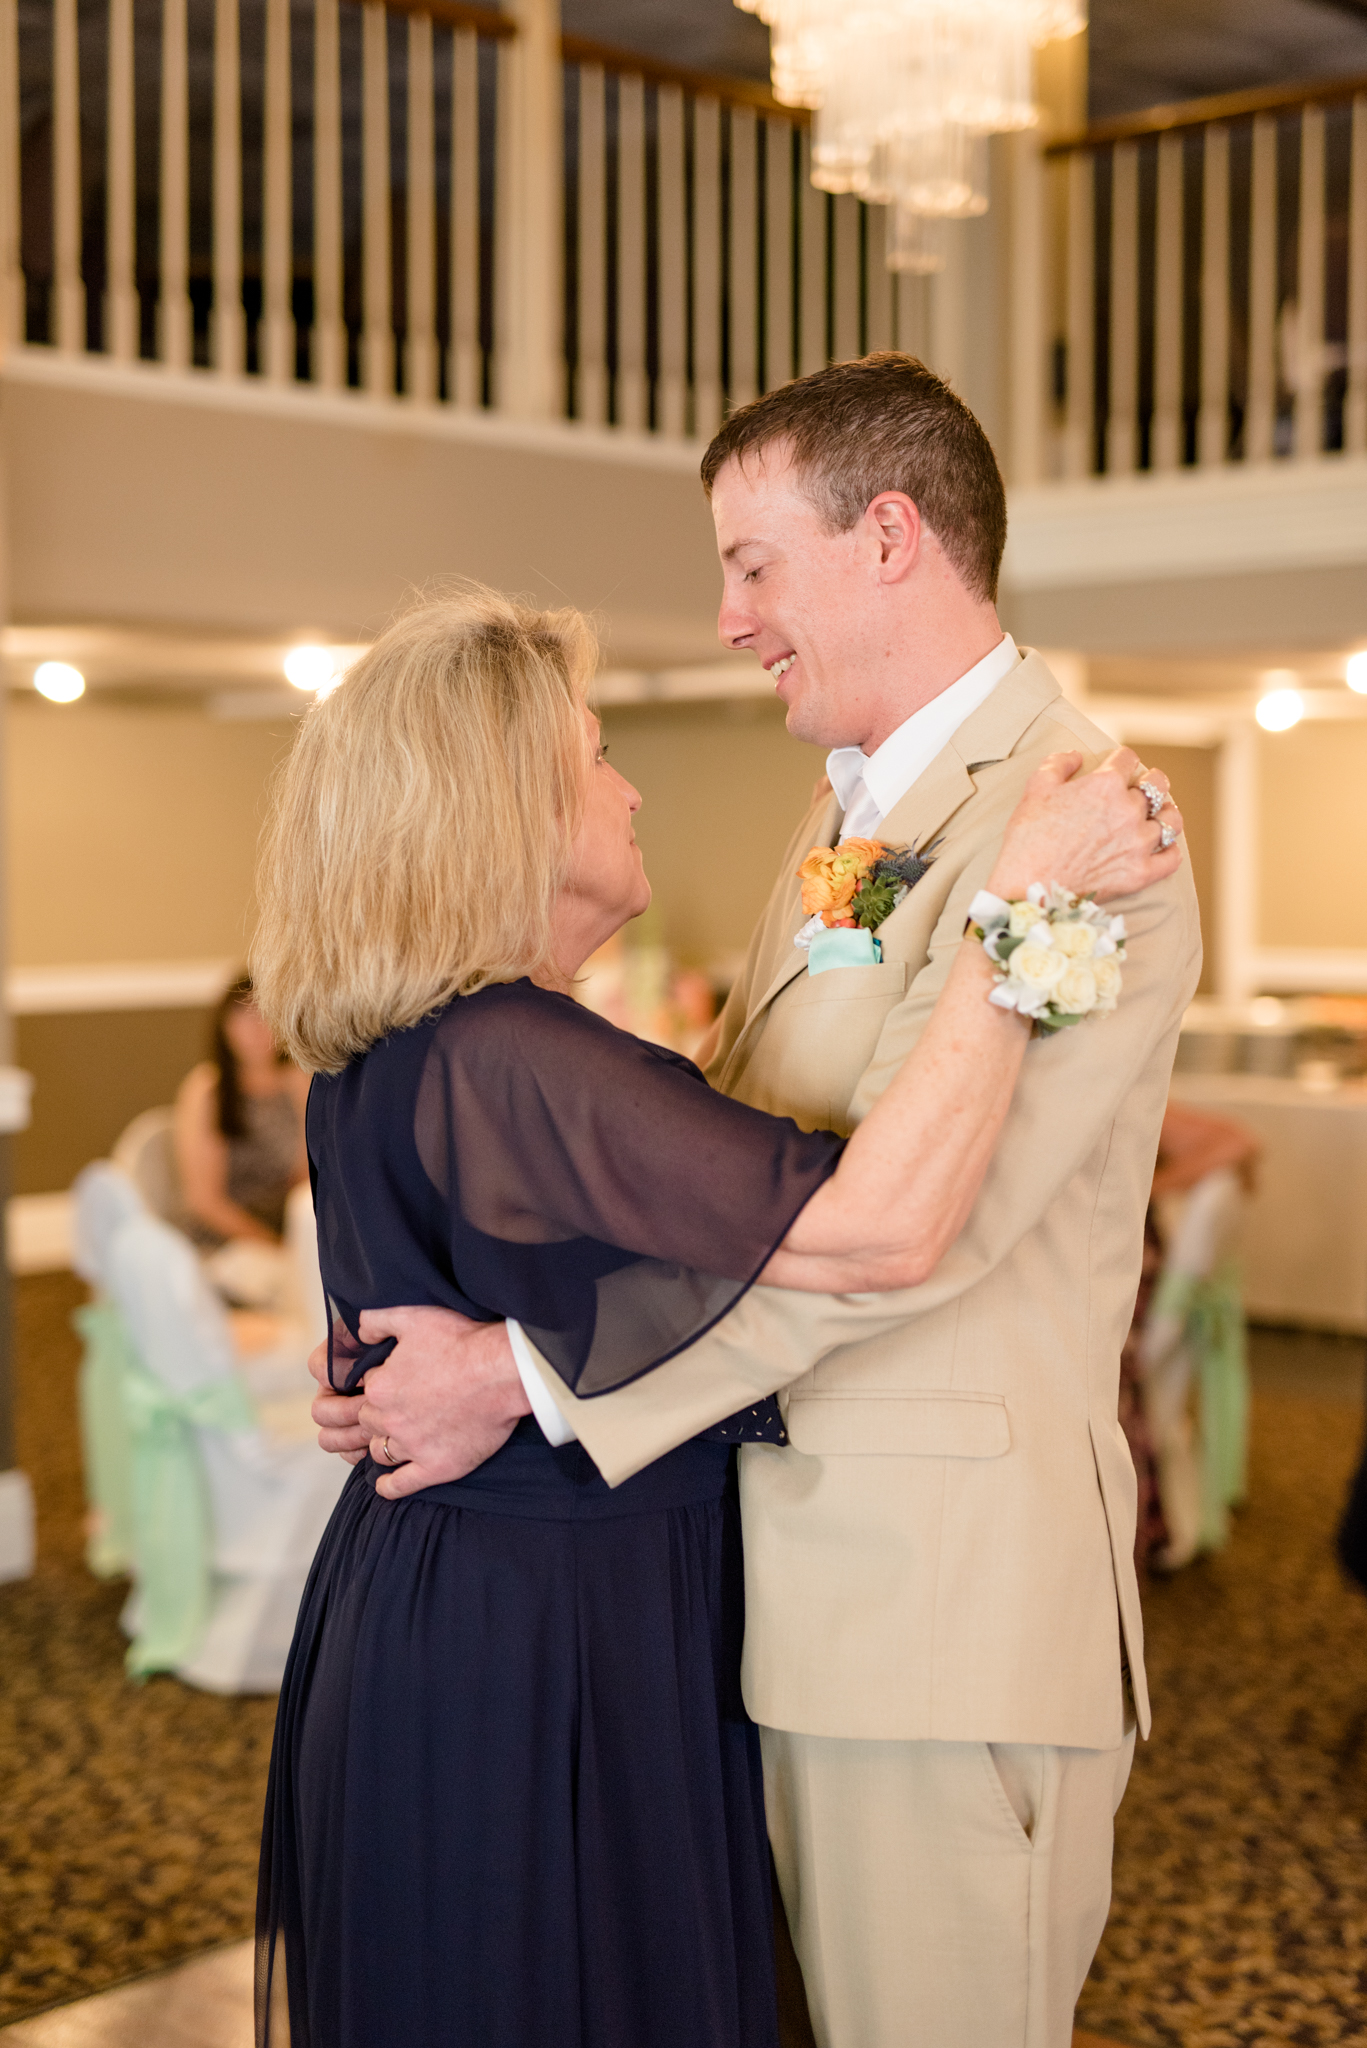 Groom dances with mother at wedding reception.